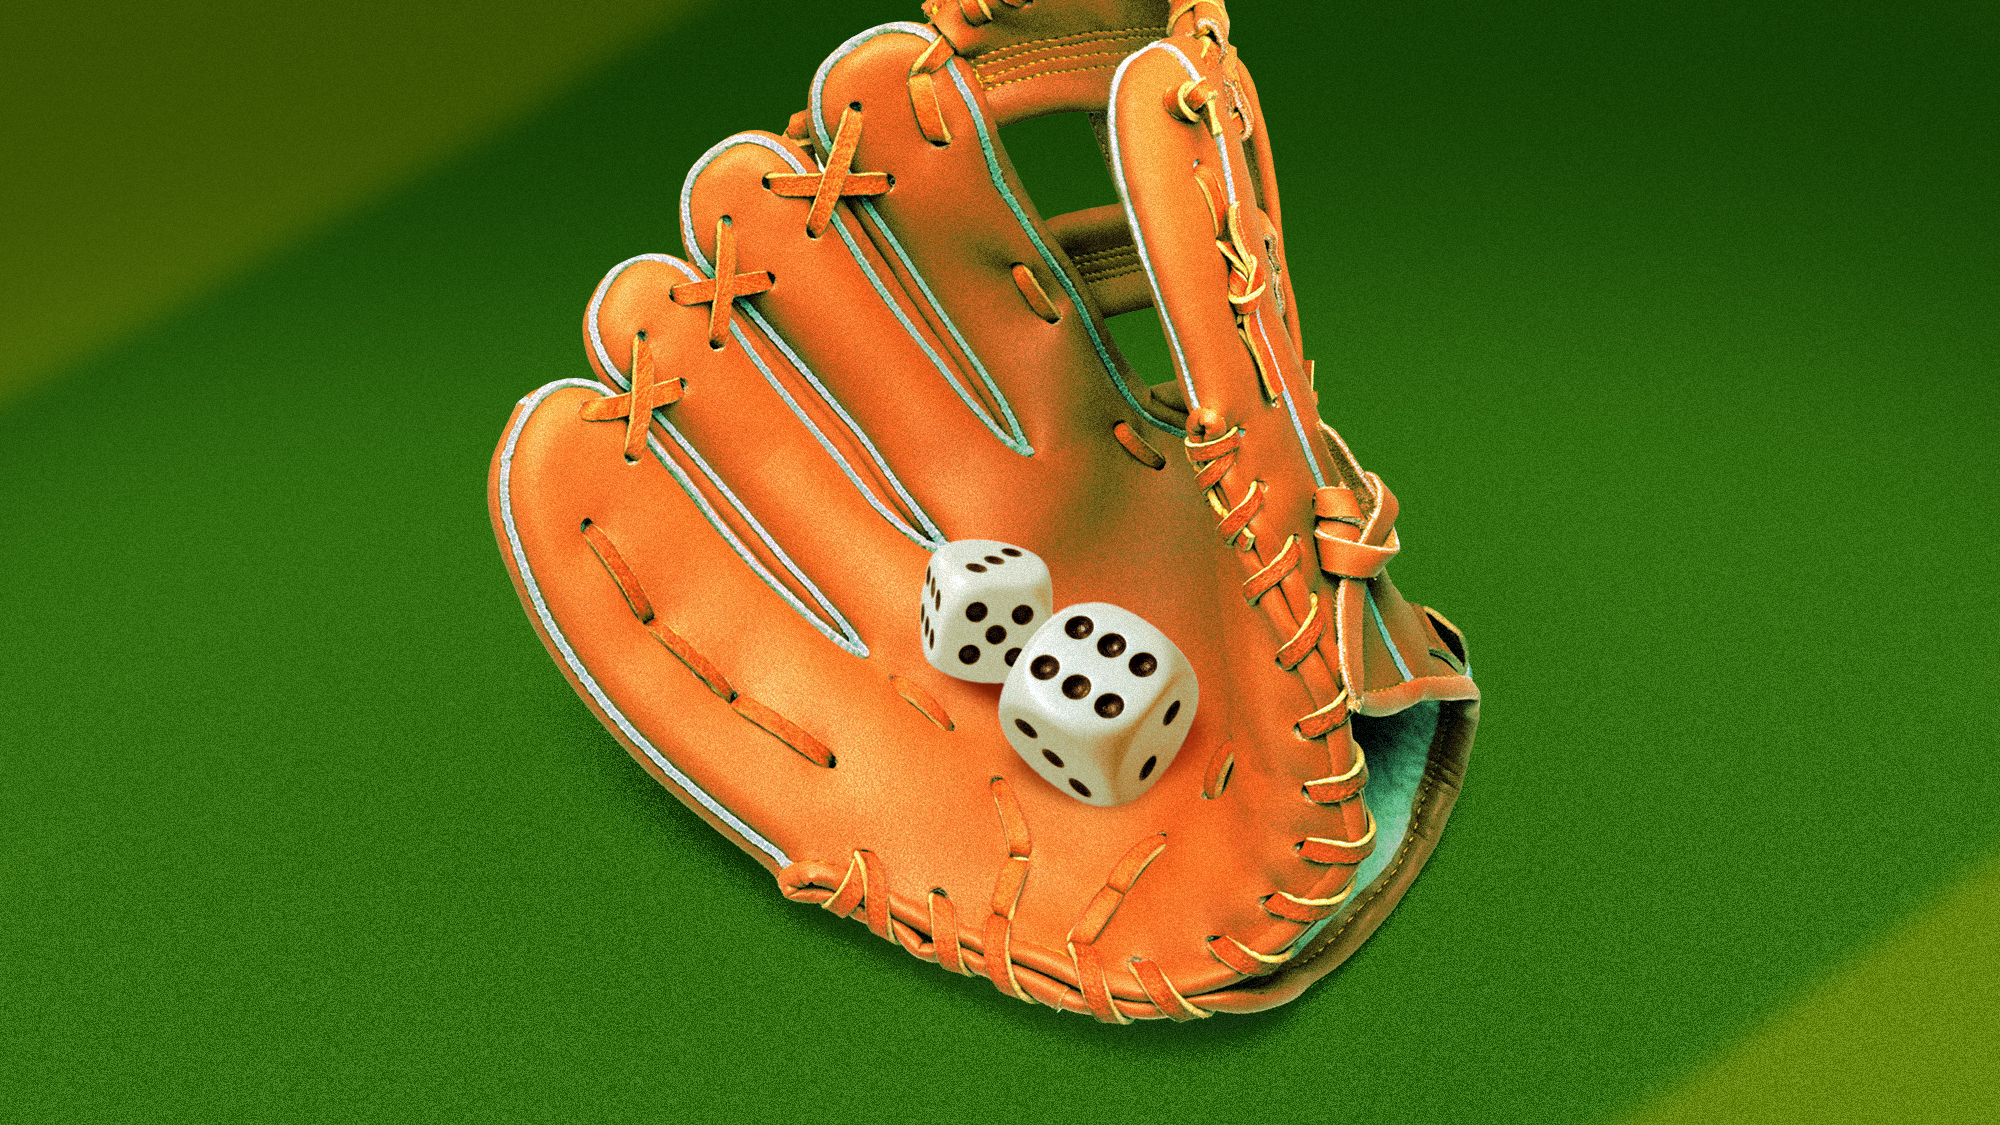 A baseball glove holding dices